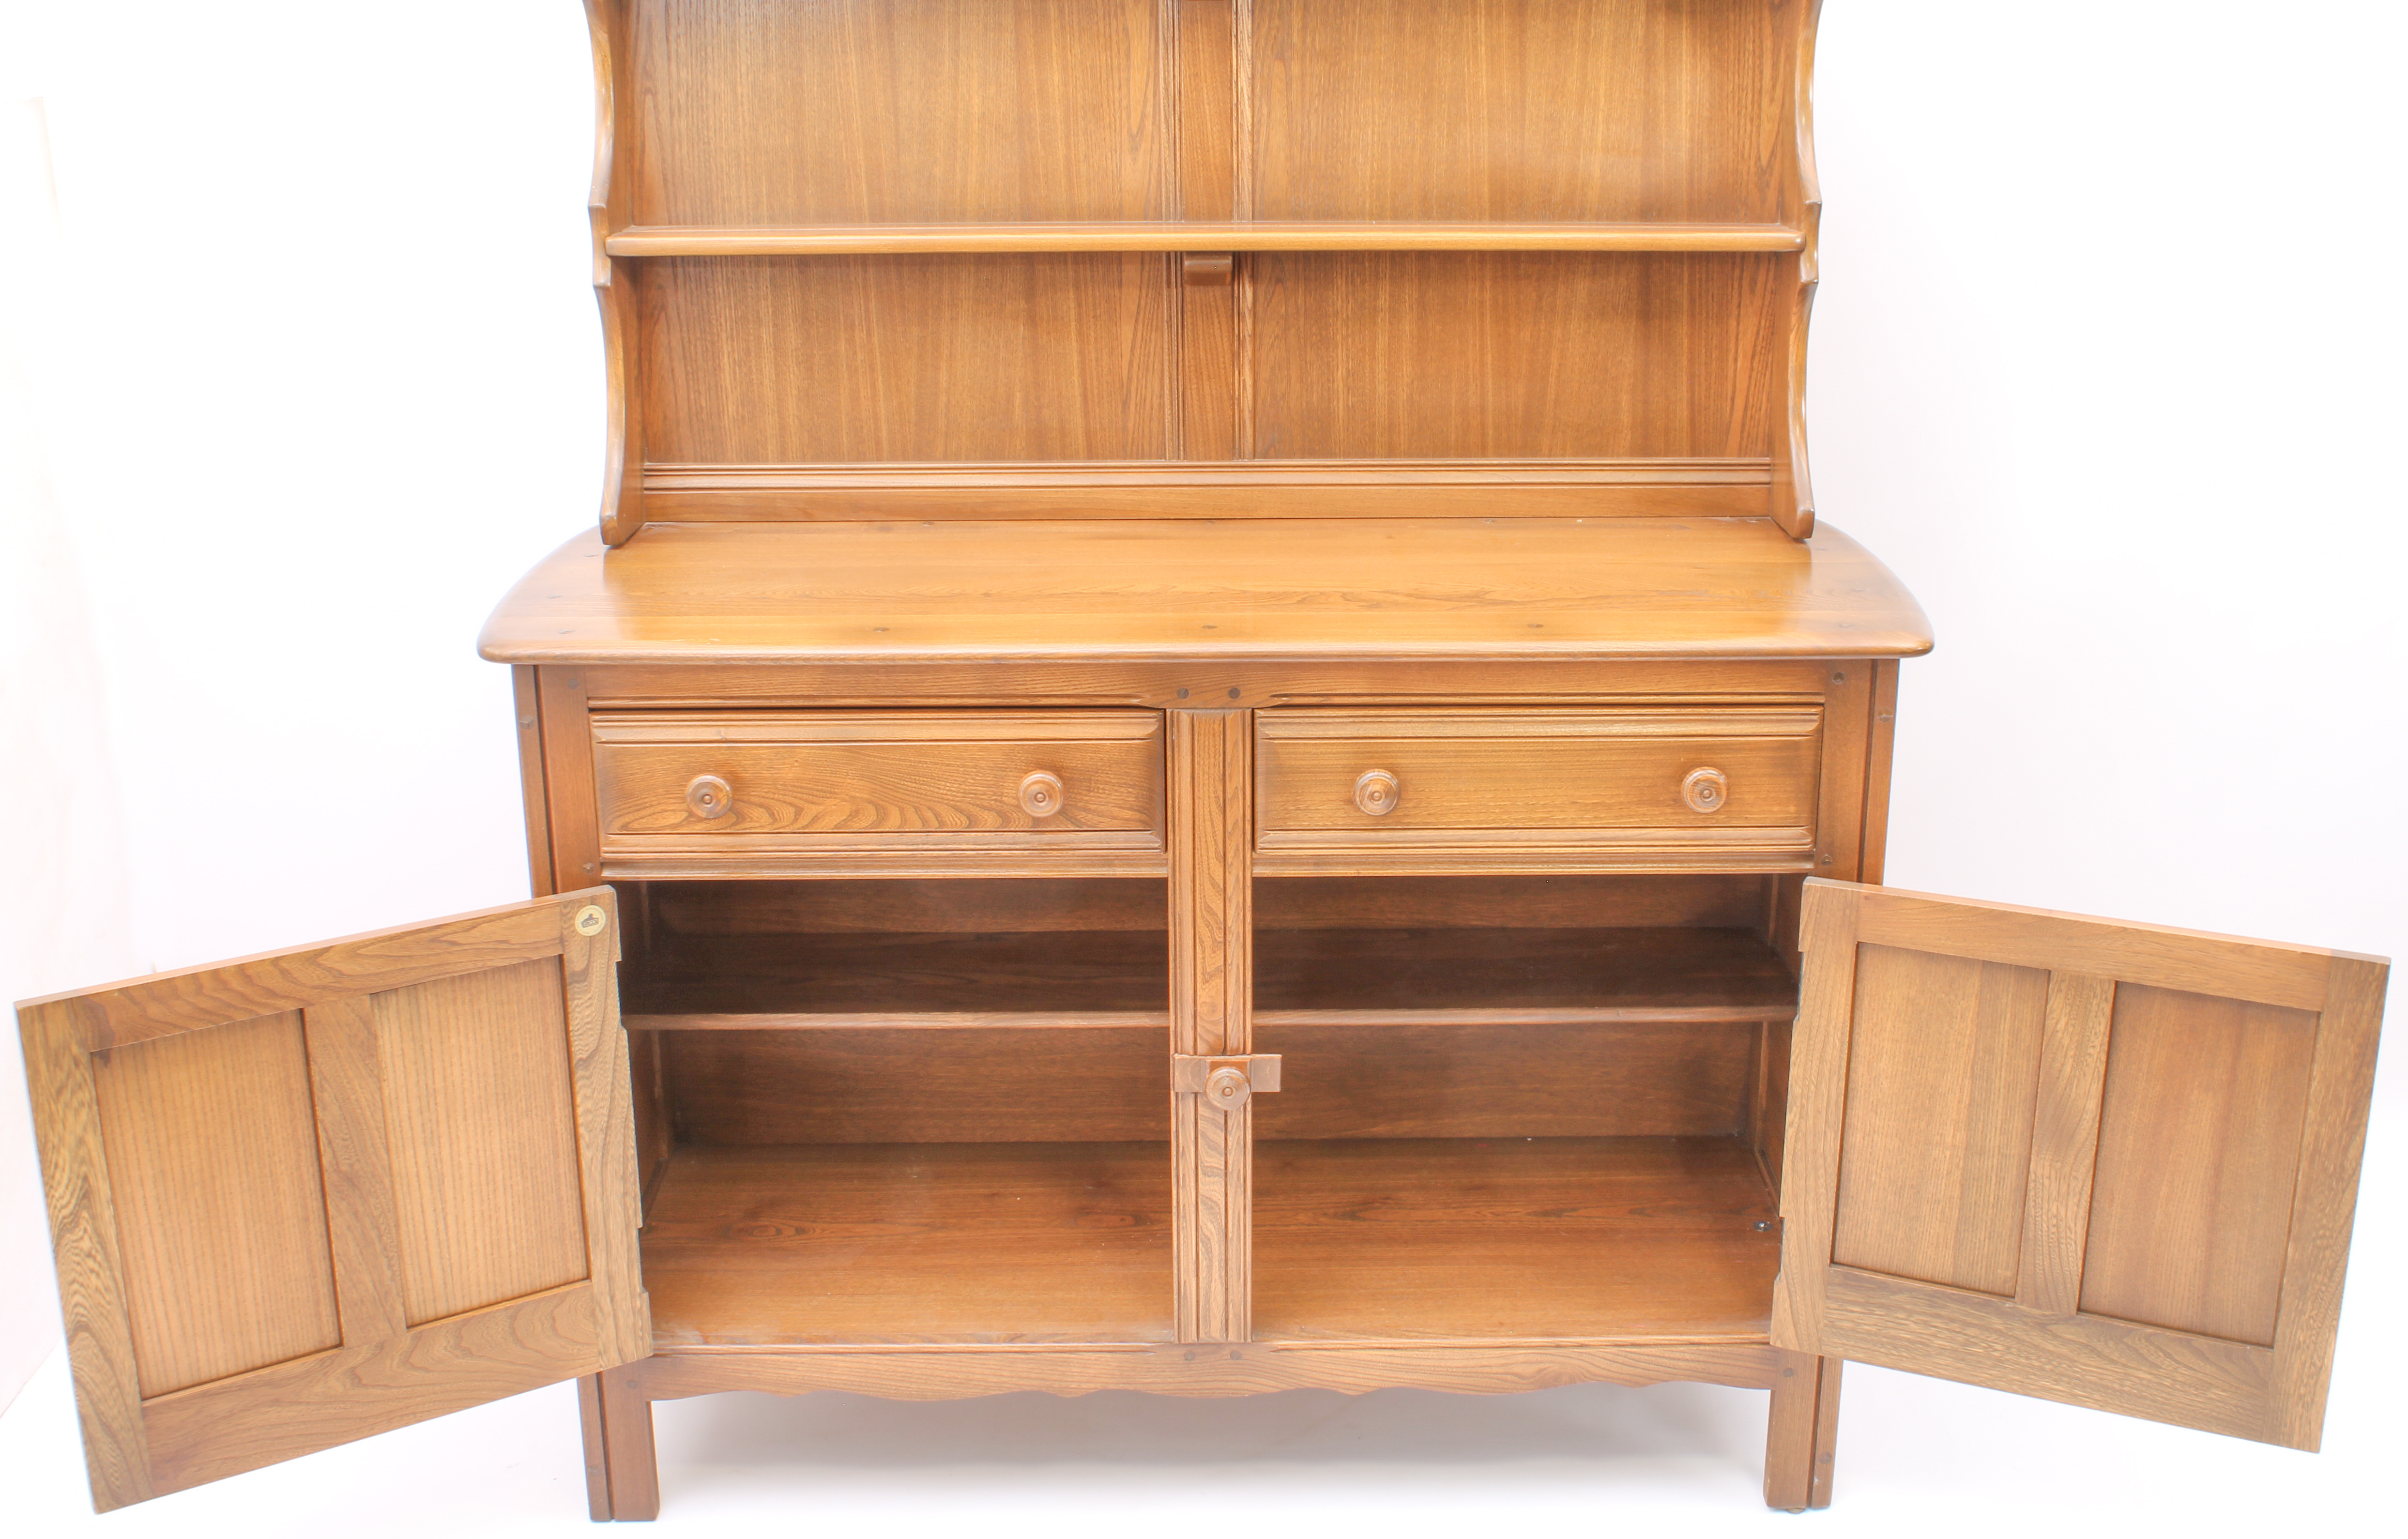 An Ercol Windsor elm dresser - the back with waterfall plate rack, over a base with two drawers (one - Image 6 of 8